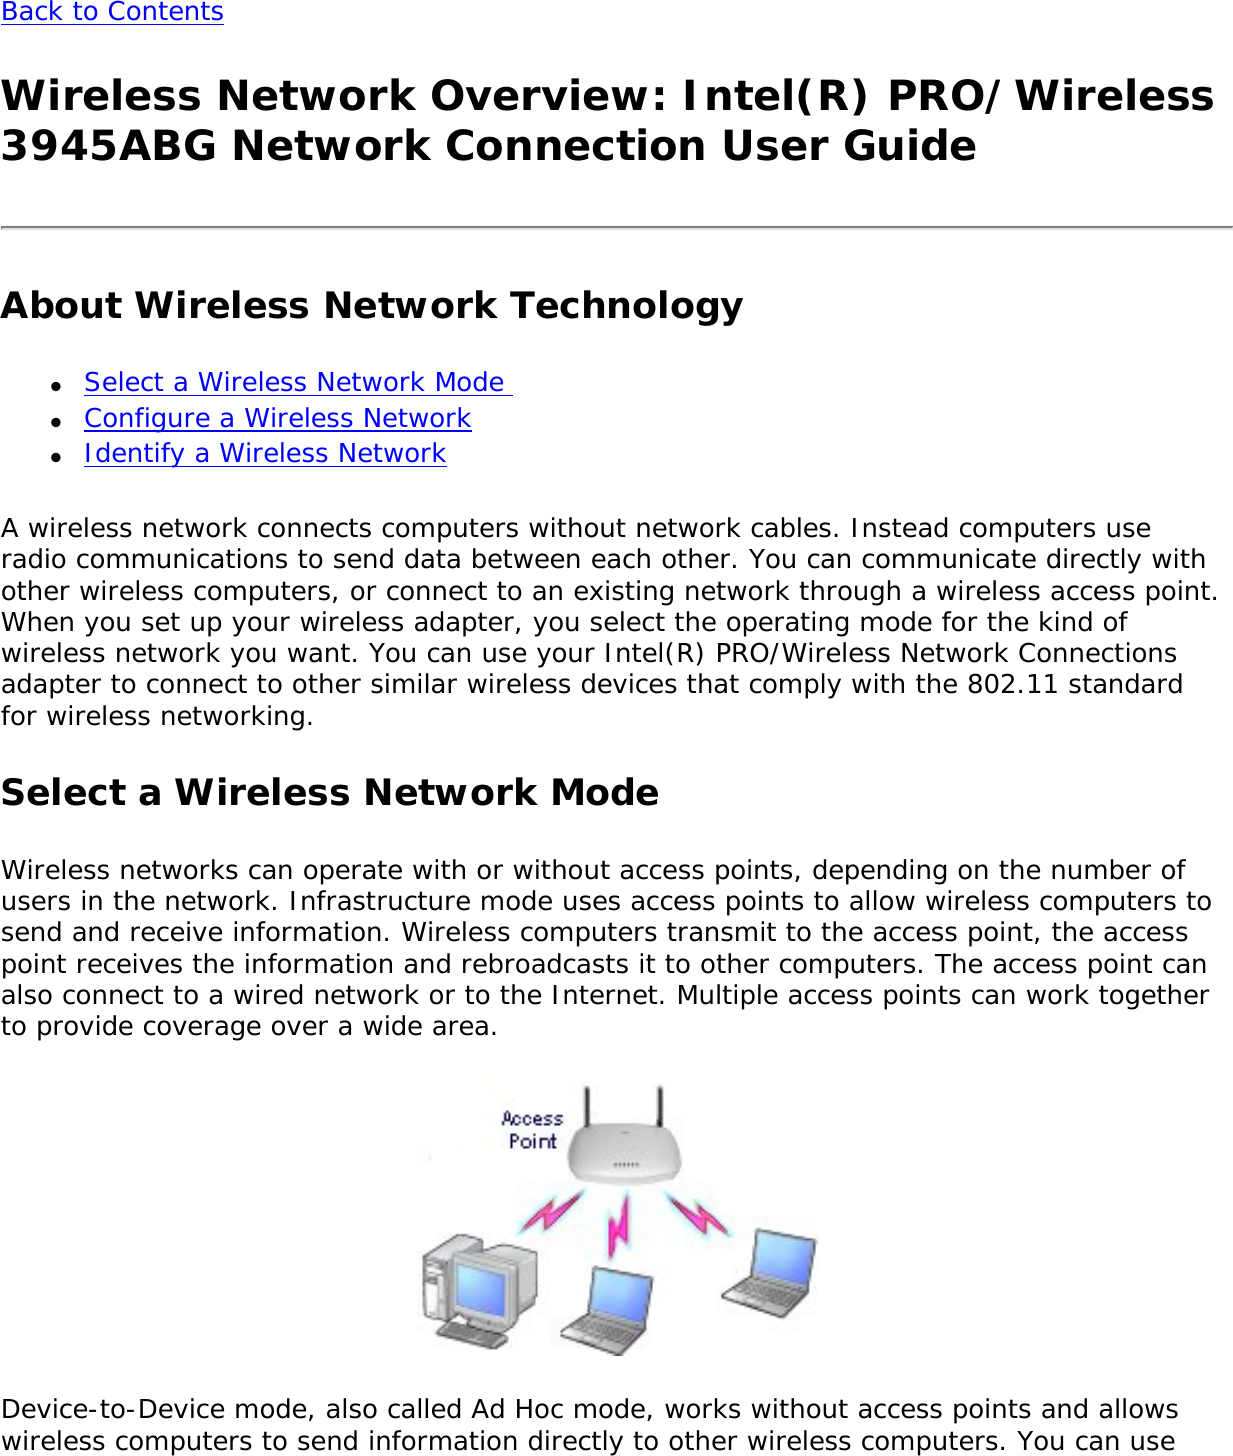 Back to Contents Wireless Network Overview: Intel(R) PRO/Wireless 3945ABG Network Connection User GuideAbout Wireless Network Technology●     Select a Wireless Network Mode ●     Configure a Wireless Network●     Identify a Wireless NetworkA wireless network connects computers without network cables. Instead computers use radio communications to send data between each other. You can communicate directly with other wireless computers, or connect to an existing network through a wireless access point. When you set up your wireless adapter, you select the operating mode for the kind of wireless network you want. You can use your Intel(R) PRO/Wireless Network Connections adapter to connect to other similar wireless devices that comply with the 802.11 standard for wireless networking. Select a Wireless Network ModeWireless networks can operate with or without access points, depending on the number of users in the network. Infrastructure mode uses access points to allow wireless computers to send and receive information. Wireless computers transmit to the access point, the access point receives the information and rebroadcasts it to other computers. The access point can also connect to a wired network or to the Internet. Multiple access points can work together to provide coverage over a wide area.  Device-to-Device mode, also called Ad Hoc mode, works without access points and allows wireless computers to send information directly to other wireless computers. You can use 